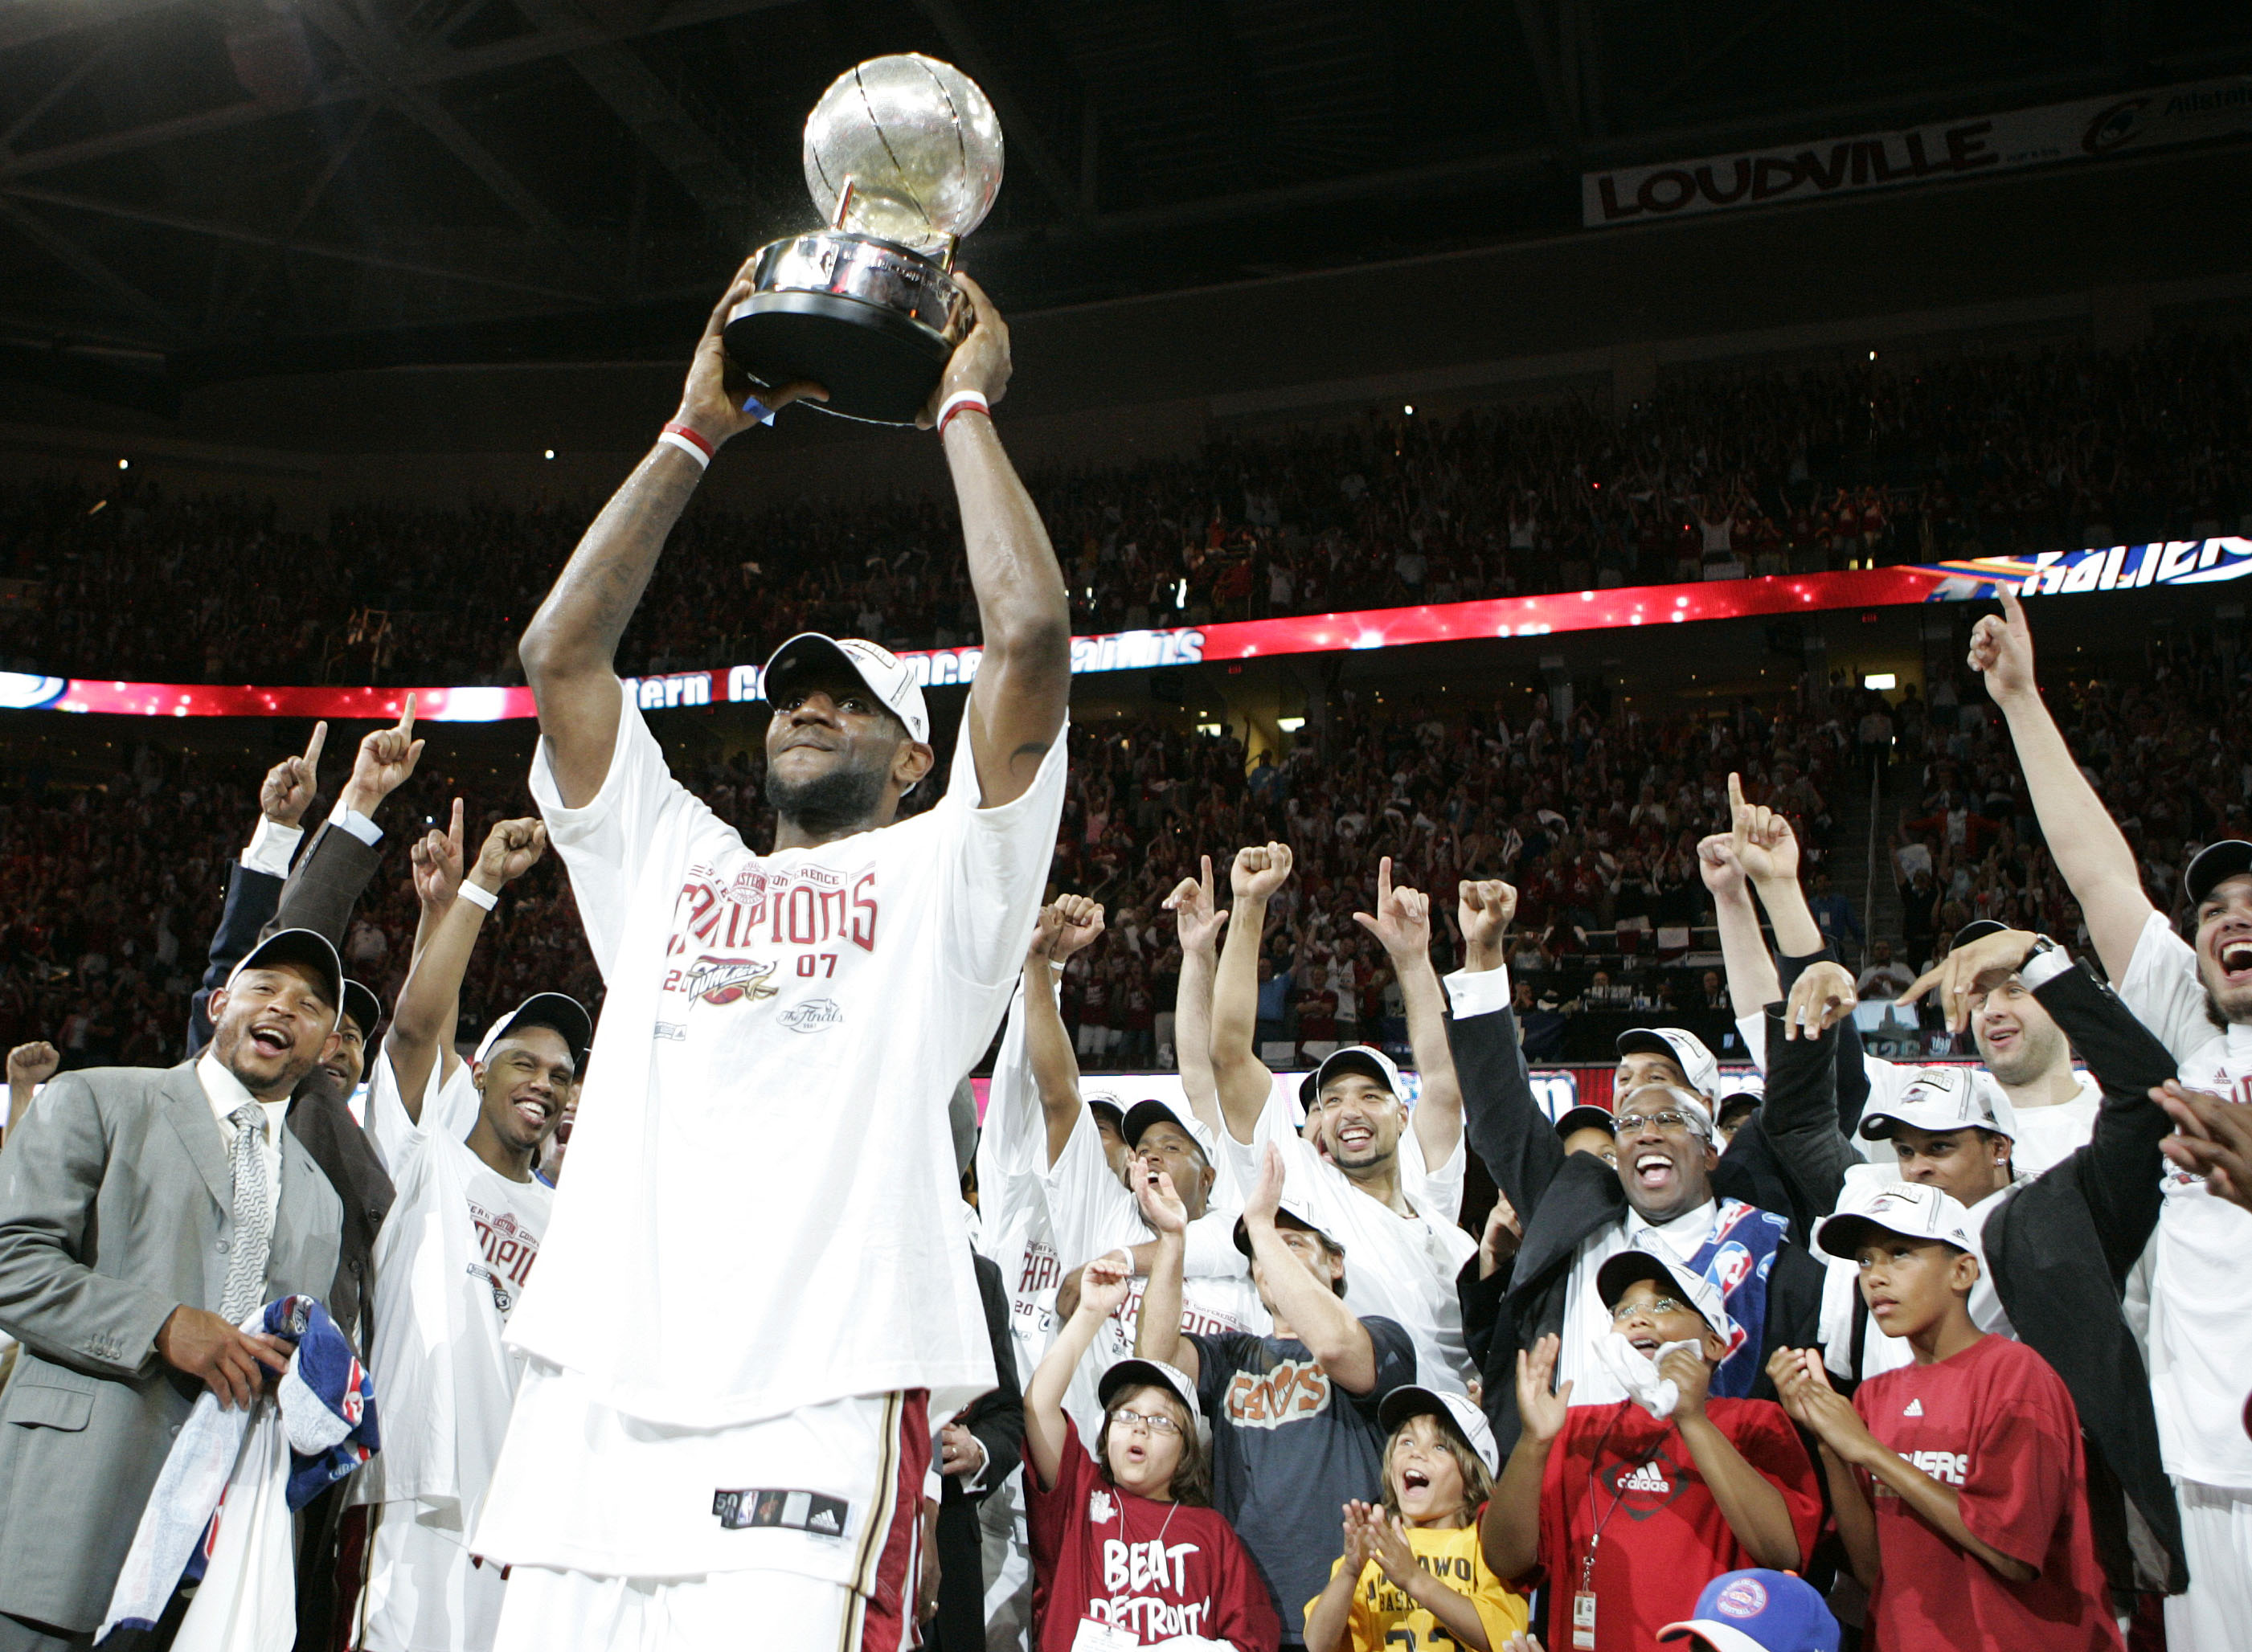 03sCAVSlJG-- DAILY FOR SPORTS -- Cleveland Cavaliers' LeBron James hold up the Eastern Conference championship trophy after defeating the Detroit Pistons in six games Saturday, June 02, 2007 at Quicken Loans Arena in Cleveland.  (Joshua Gunter/The Plain Dealer)